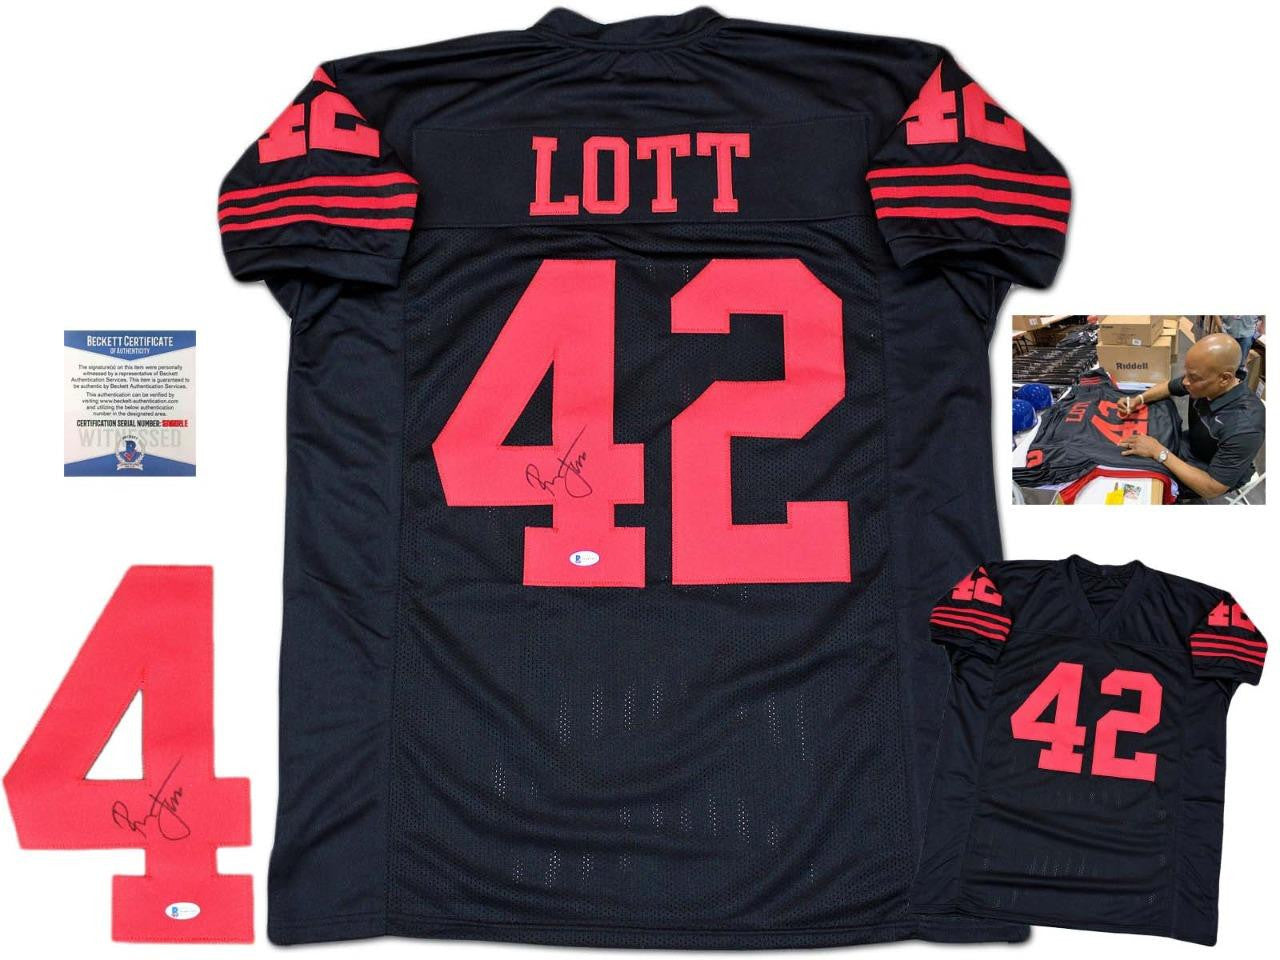 Ronnie Lott Autographed Signed Jersey - Black